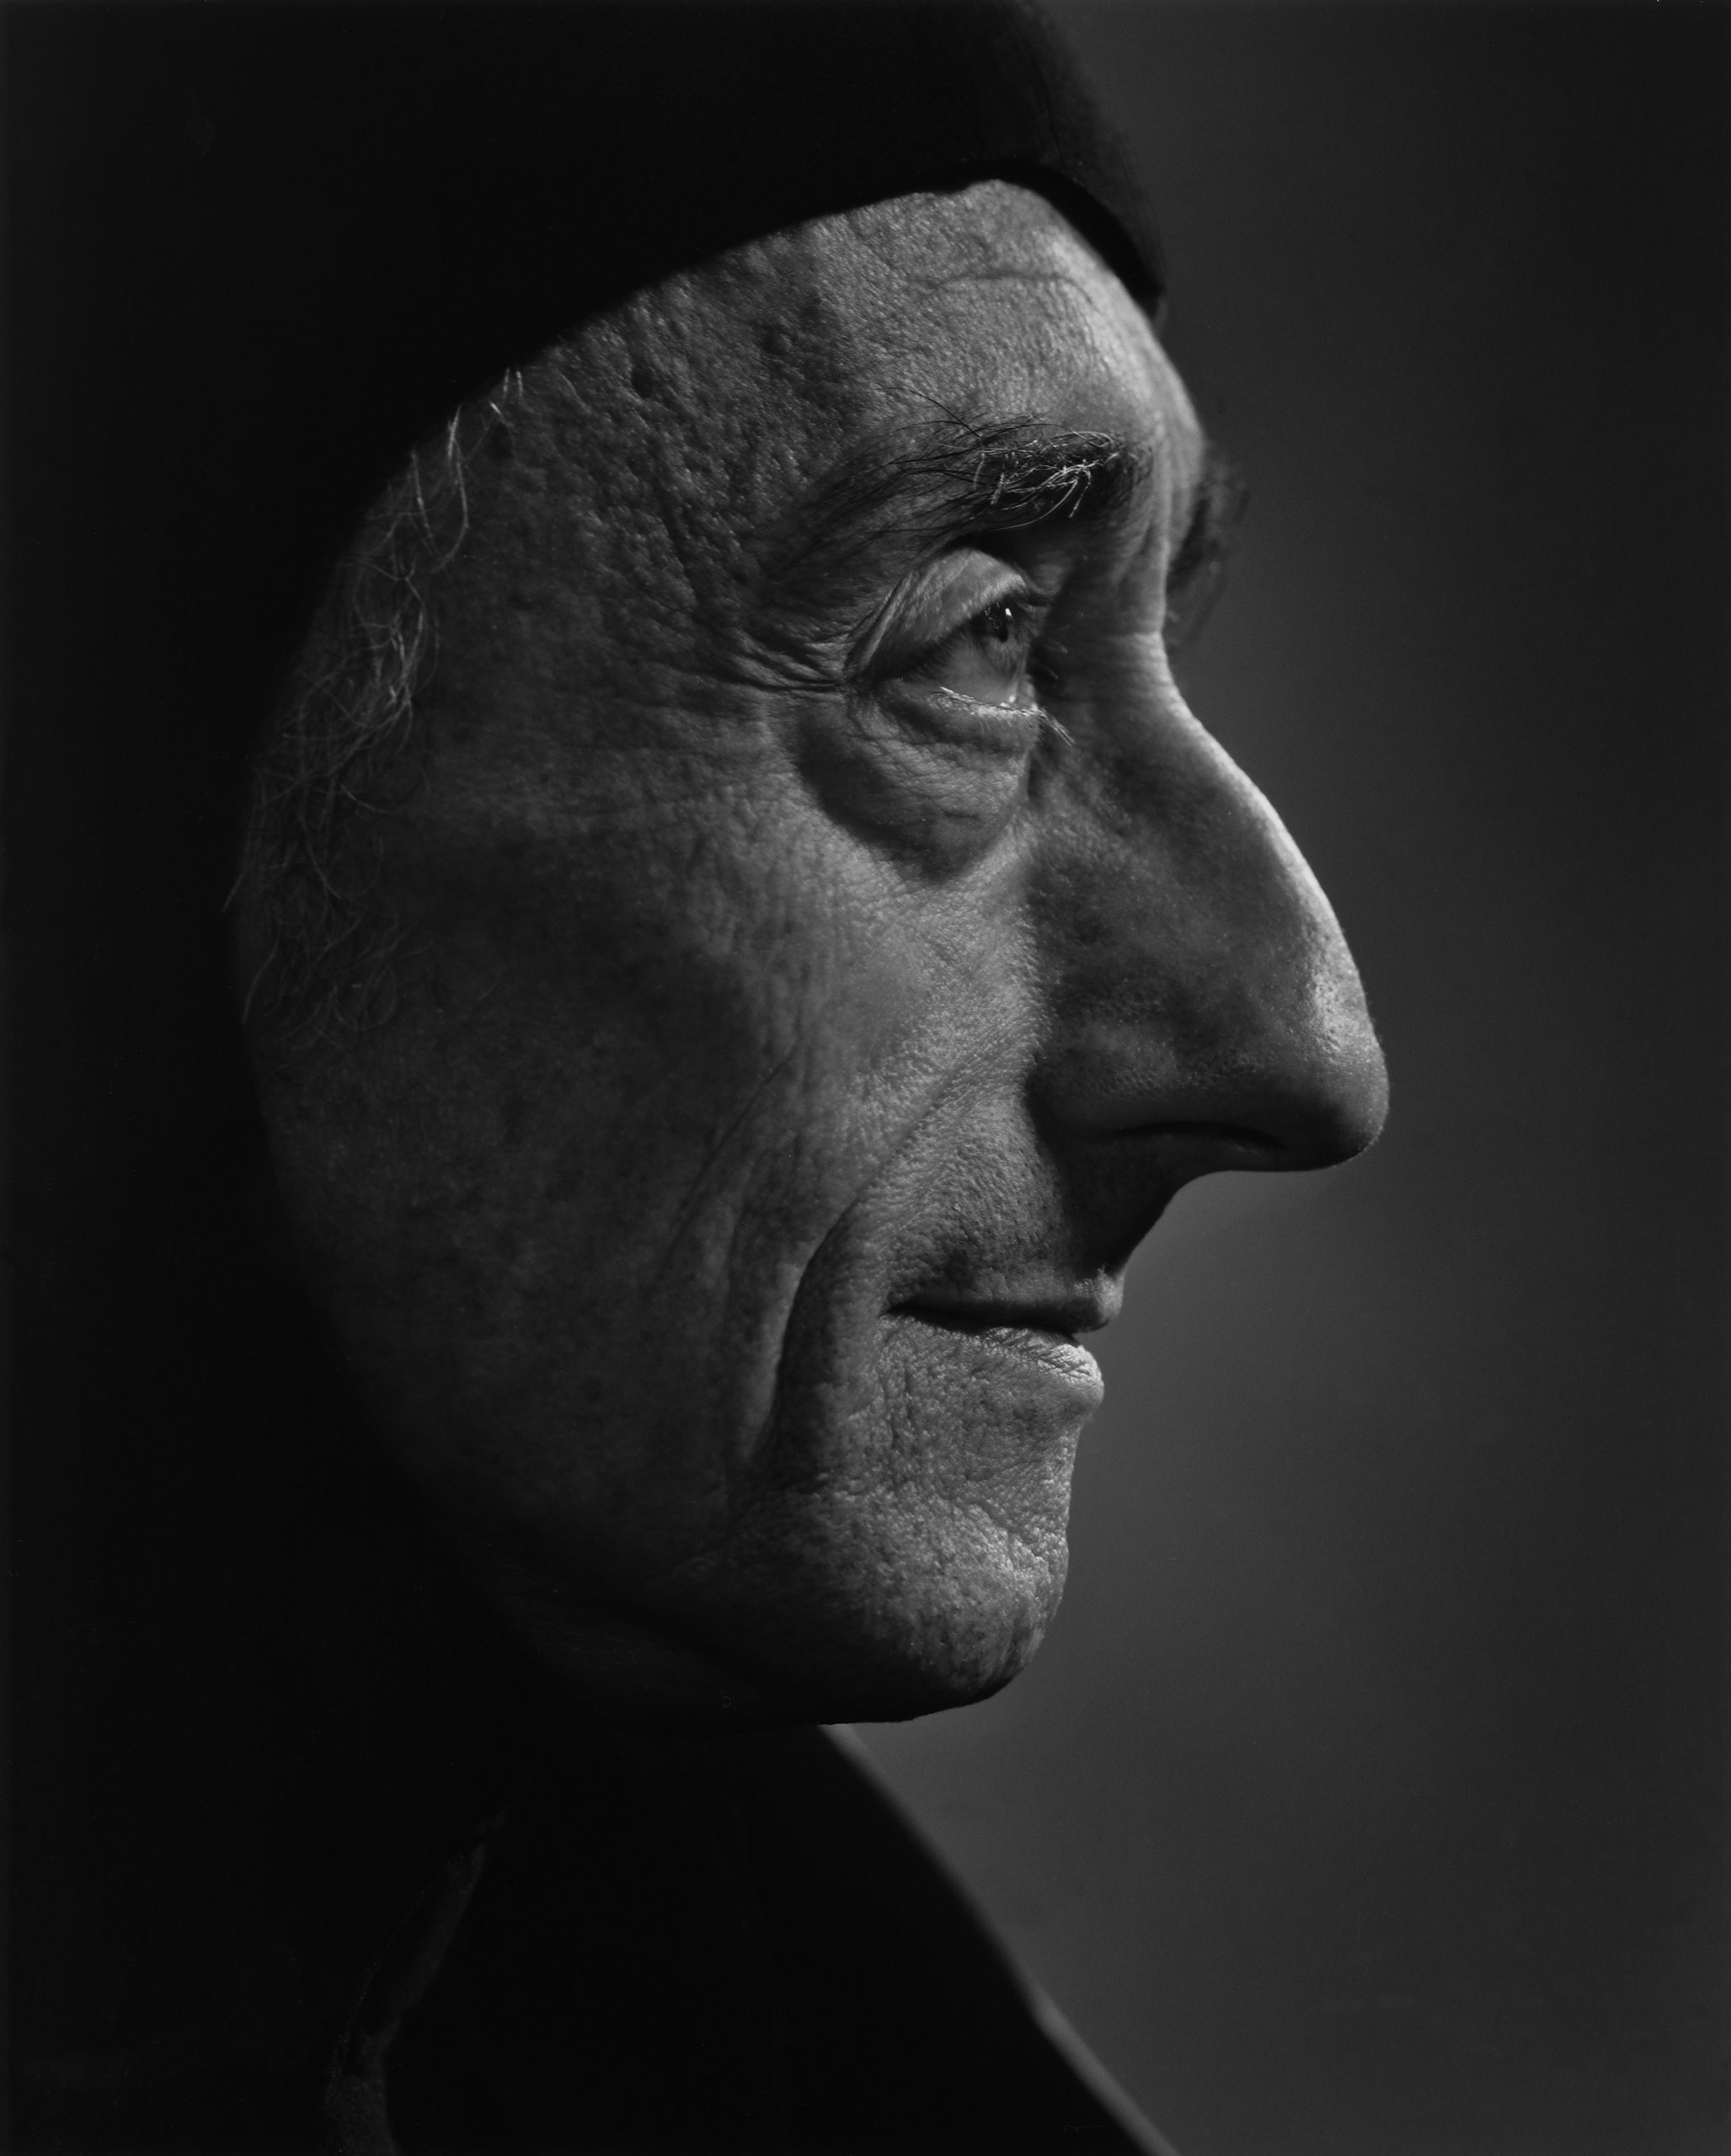 Jacques Cousteau 1972 by Yousuf Karsh